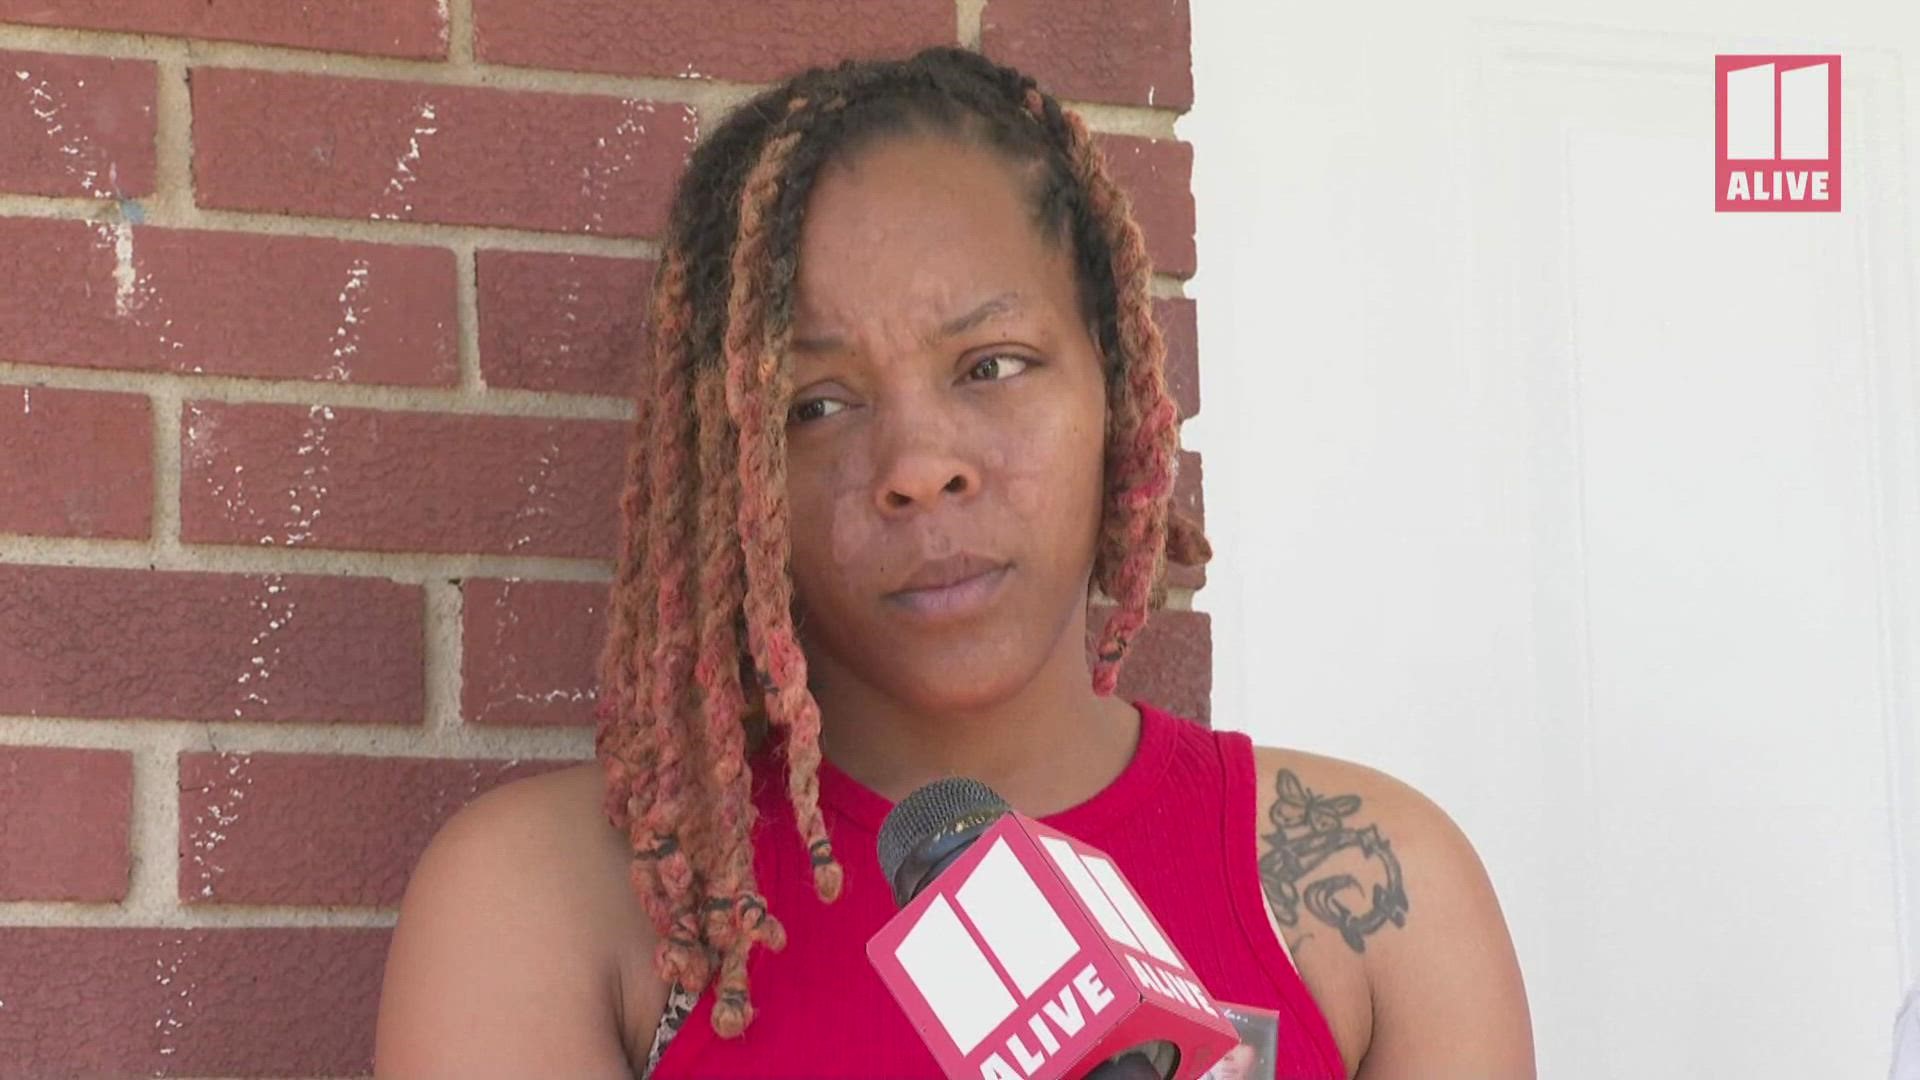 LaKevia Jackson was shot and killed outside a bowling alley in Atlanta last month. Her sister Yaesha spoke to 11Alive about her grief and the ongoing murder case.